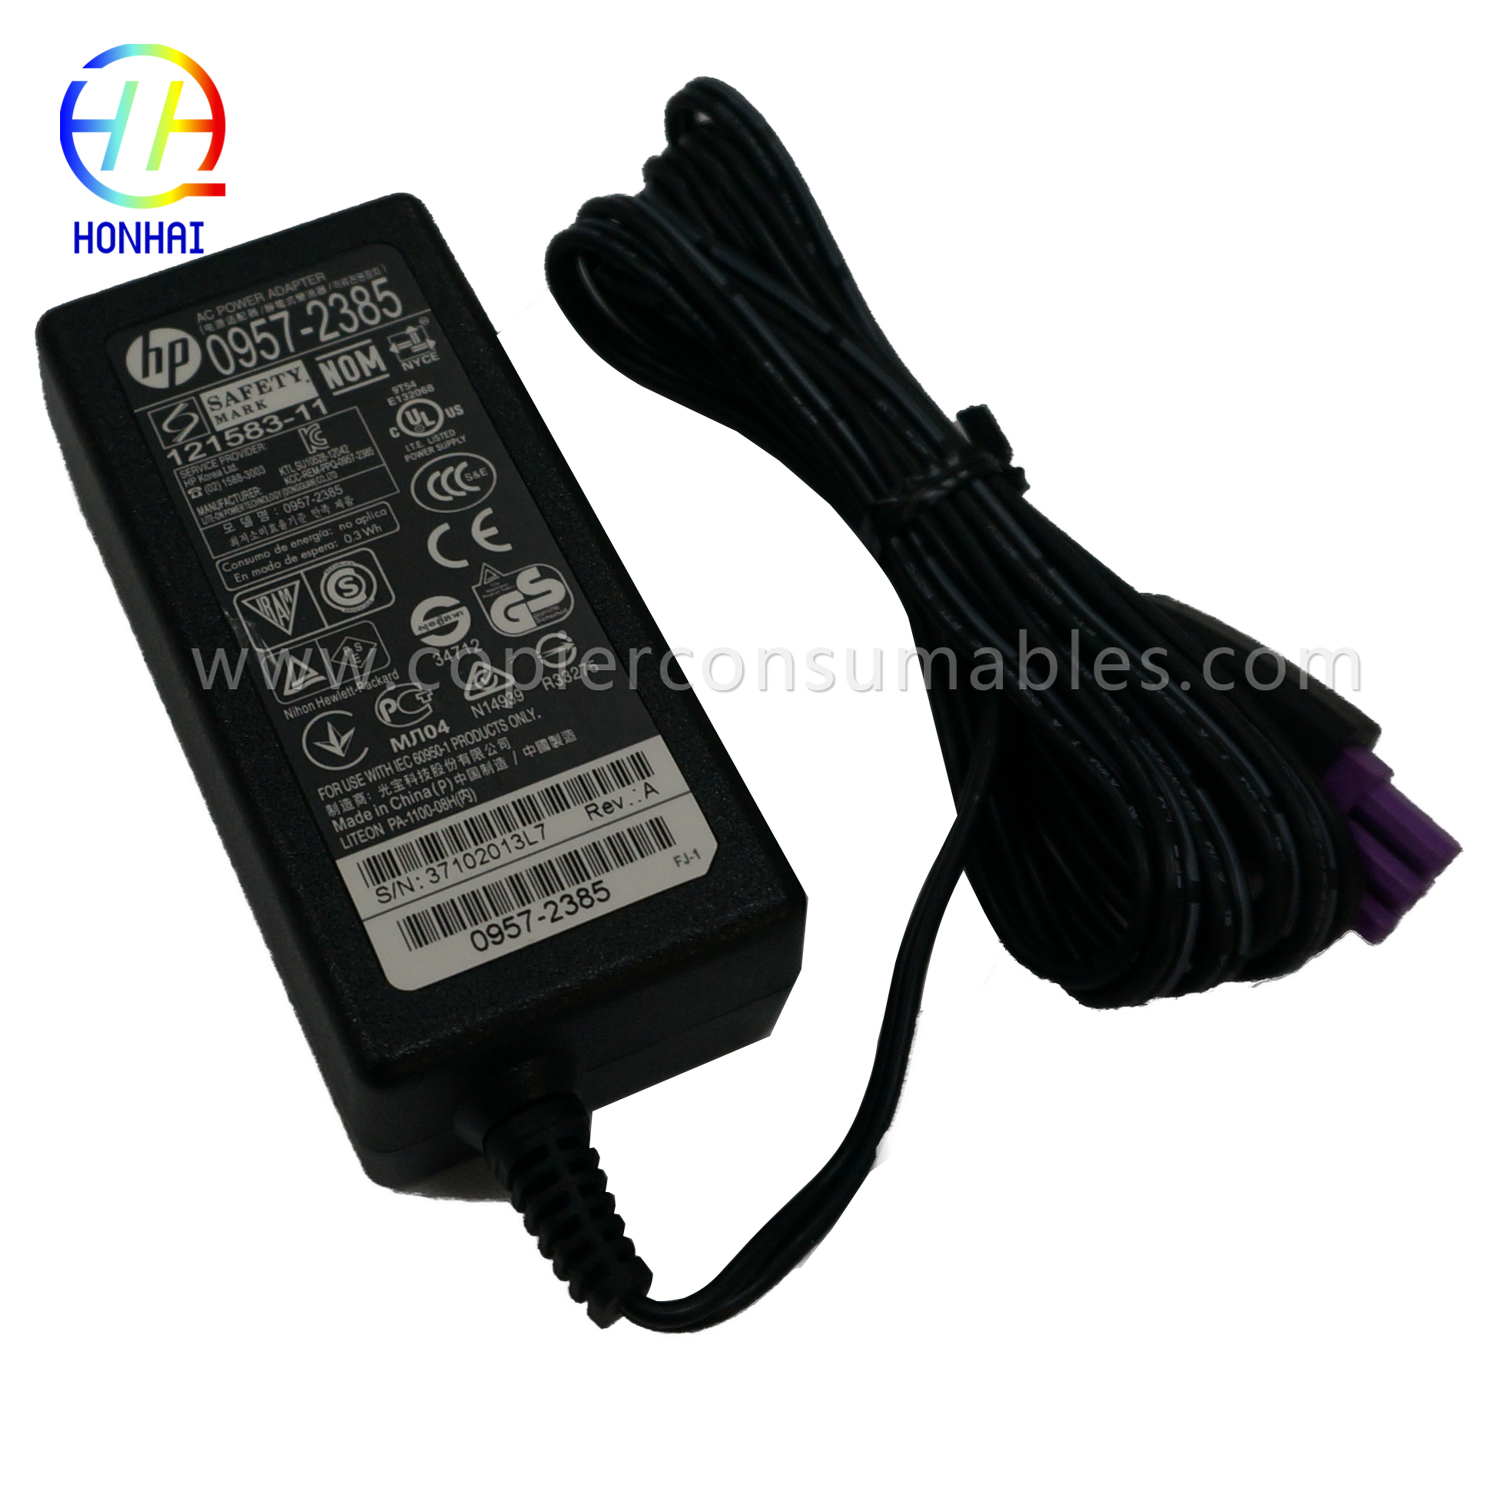 Power Adapter for HP 1010 1510 1518 0957-2385